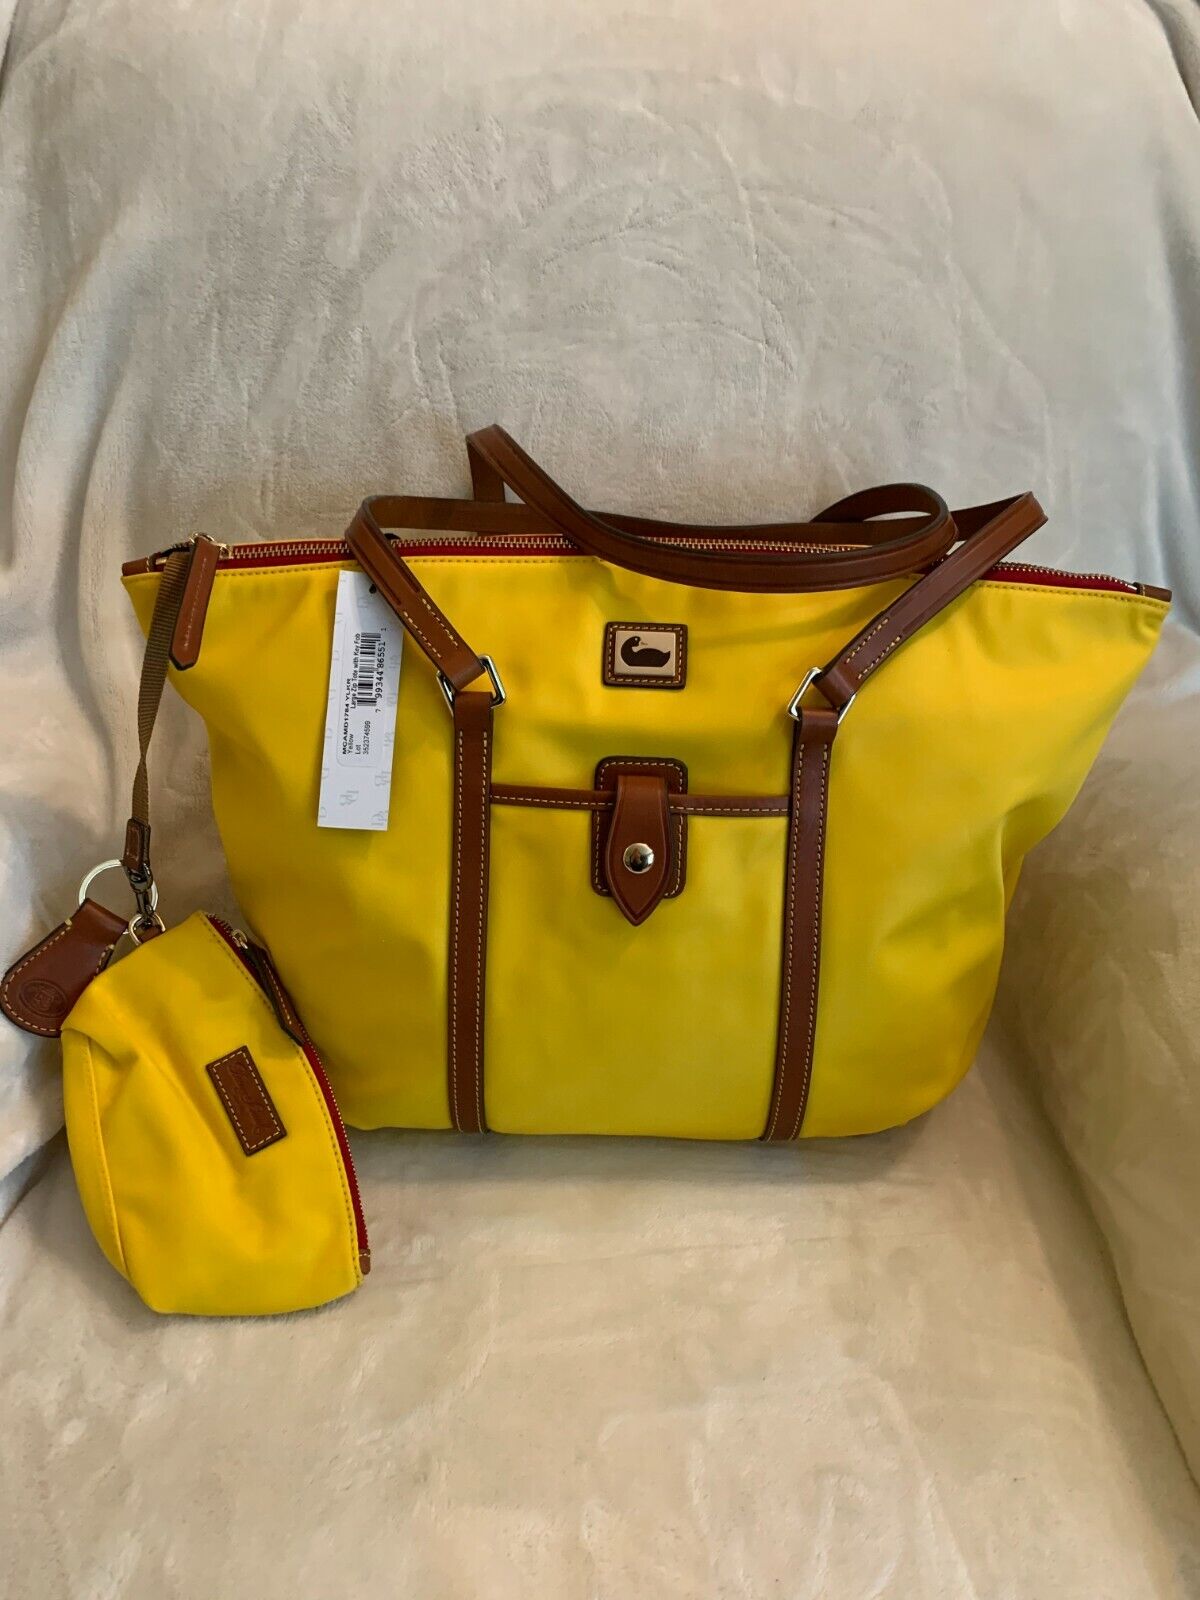 Dooney & Bourke Wayfarer Nylon Tote with Accessories,Yellow, New with Tag